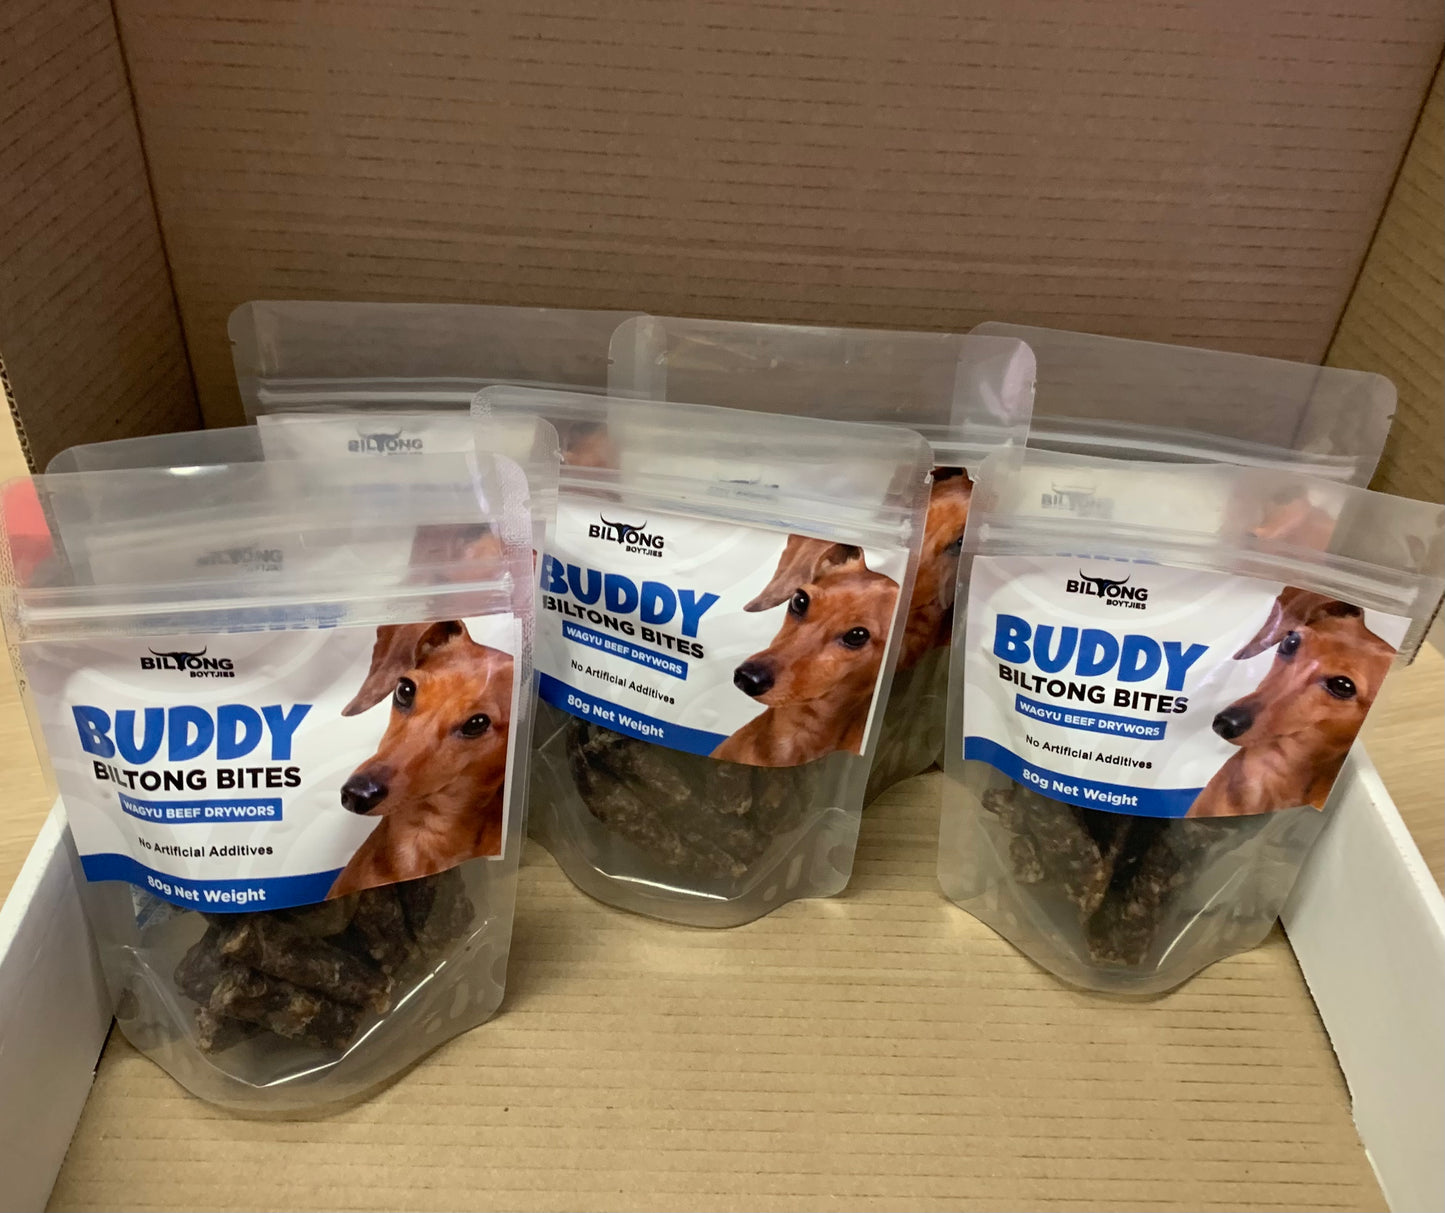 Biltong Boytjies Buddy Biltong Bites, Doggy Drywors, Dog Biltong packing Snack Pack Set image from Pets Planet - South Africa’s No.1 ePet Store for premium pet products, online pet shopping, best pet store near me, for pet treats, dog treats, pet snacks, dog snacks, pet food, dog food, and for dog beds, dog bed, dog beds on sale, plush dog bed, washable dog bed, takealot dog bed, dog bed takealot, iremia dog bed, pet bed from a pet store Olivedale, pet store Bryanston, Pet Store Johannesburg